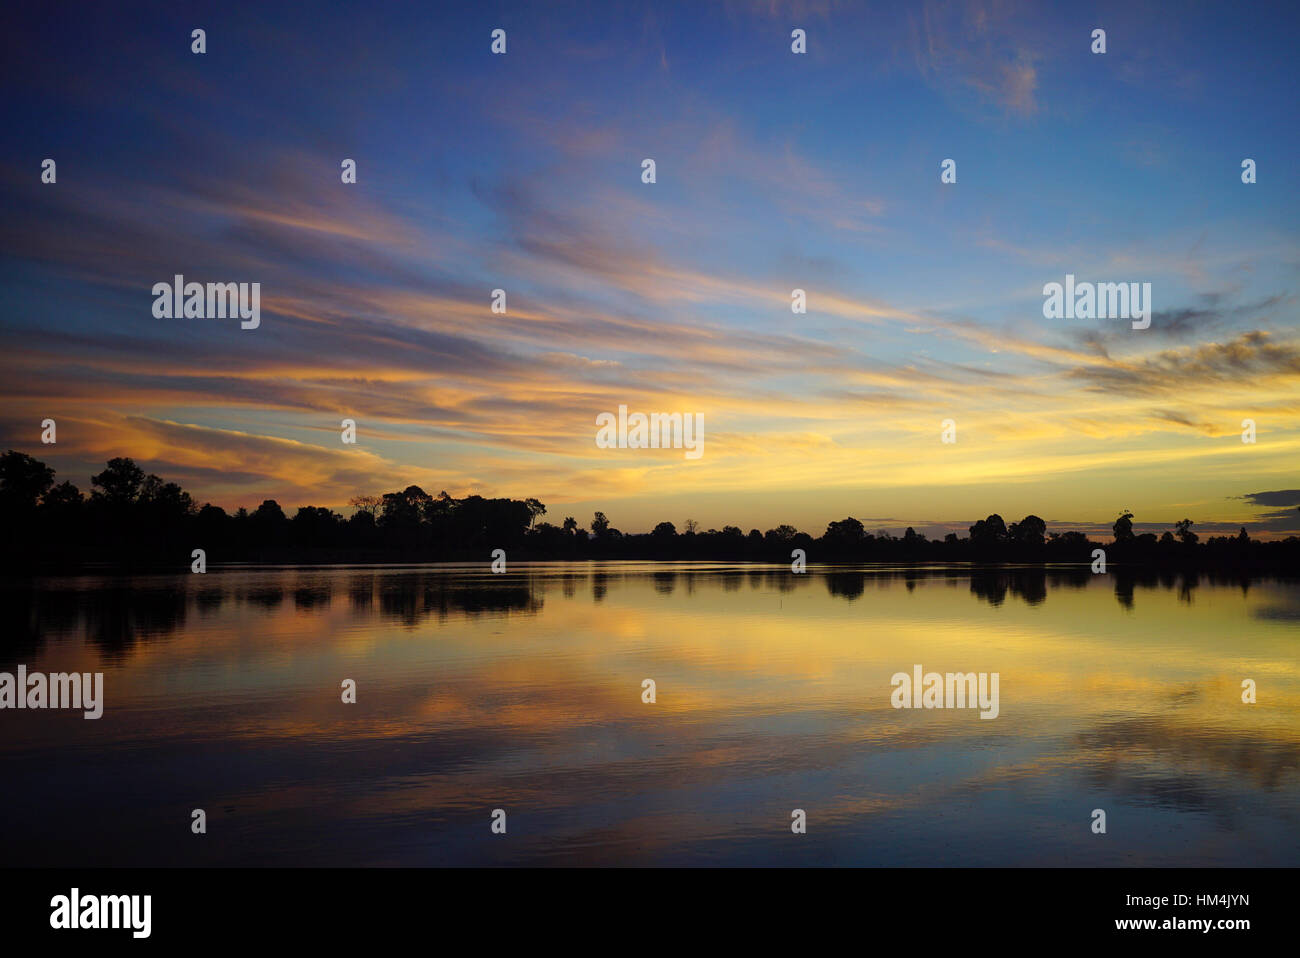 Sunrise at one of the many lakes in Angkor, Siem Riep province, Cambodia Stock Photo